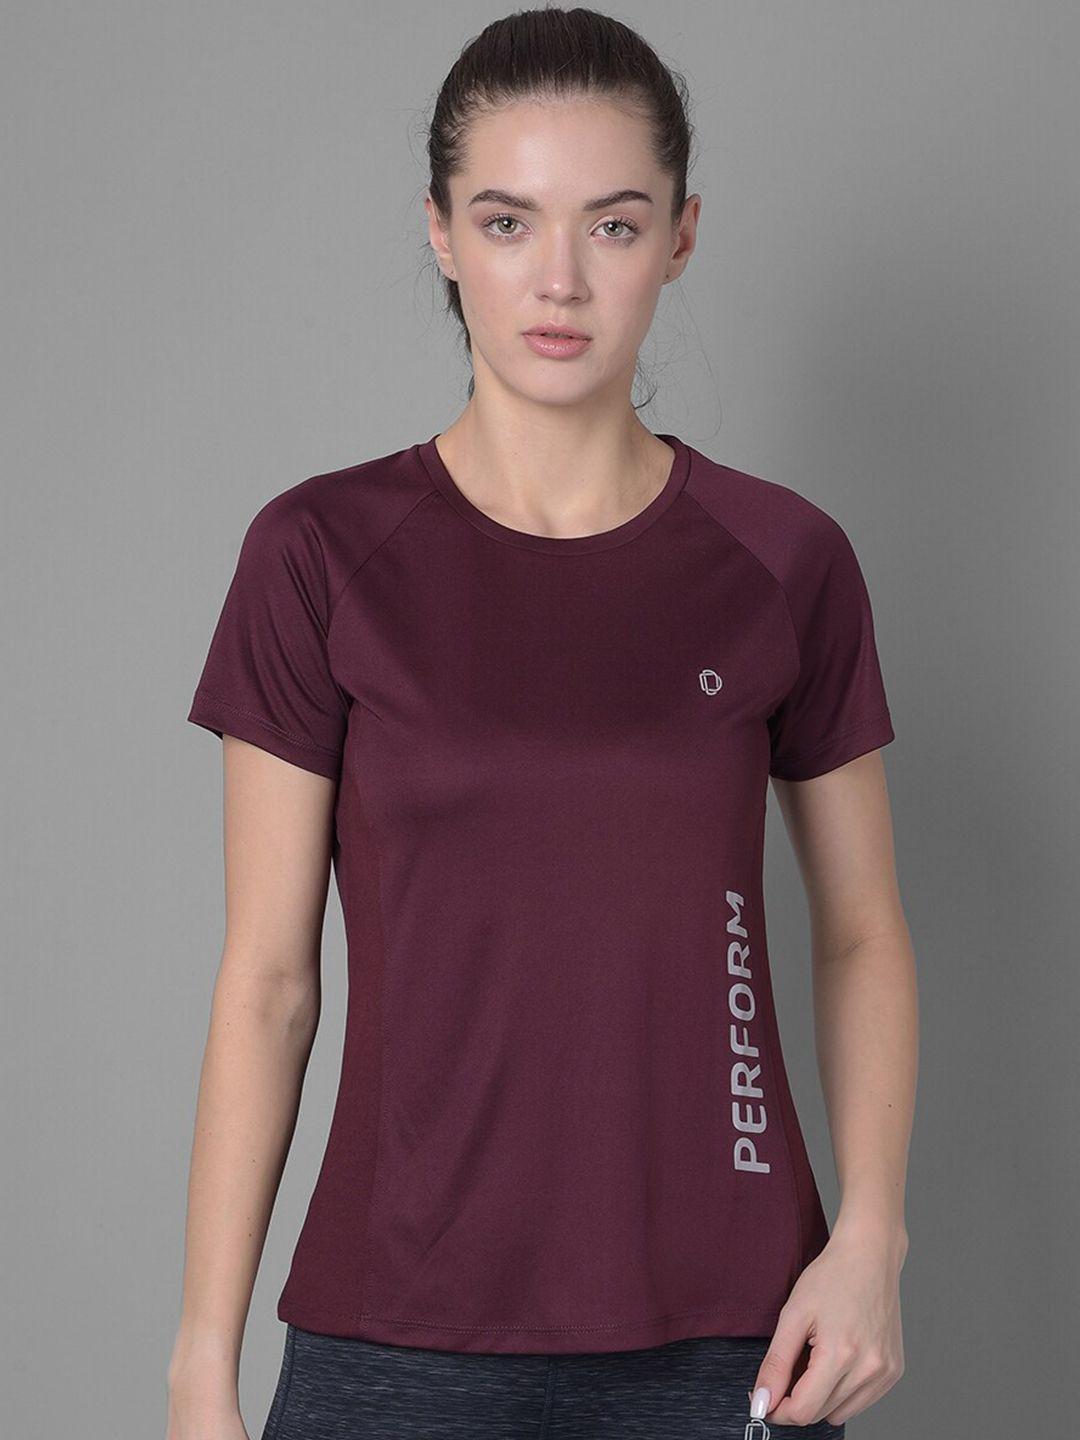 dollar-round-neck-anti-bacterial-sports-t-shirt